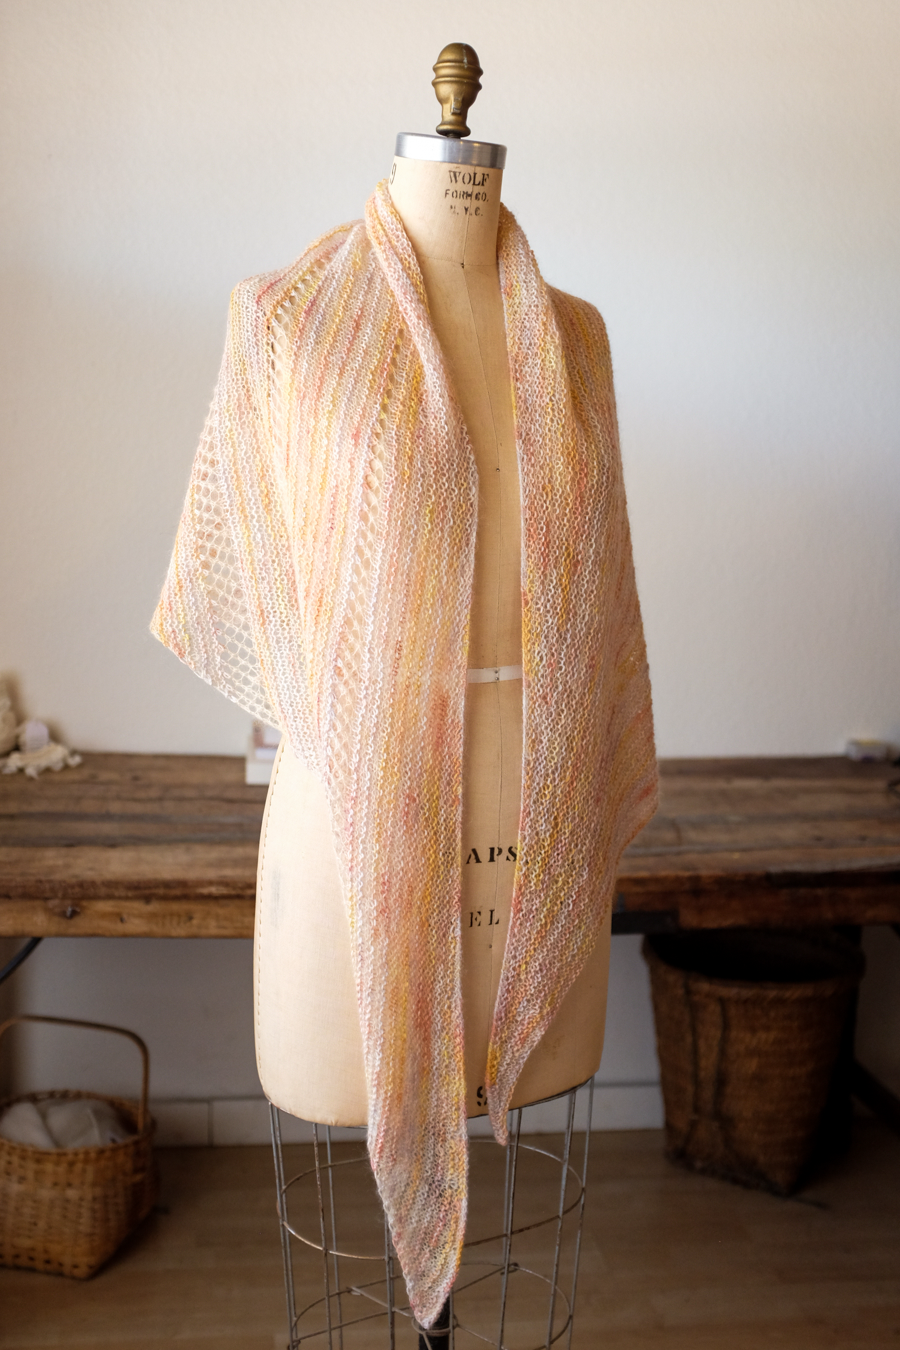 Knitting a Swoop Shawl: Tips & Tricks with Romi Hill - Friday, March 15